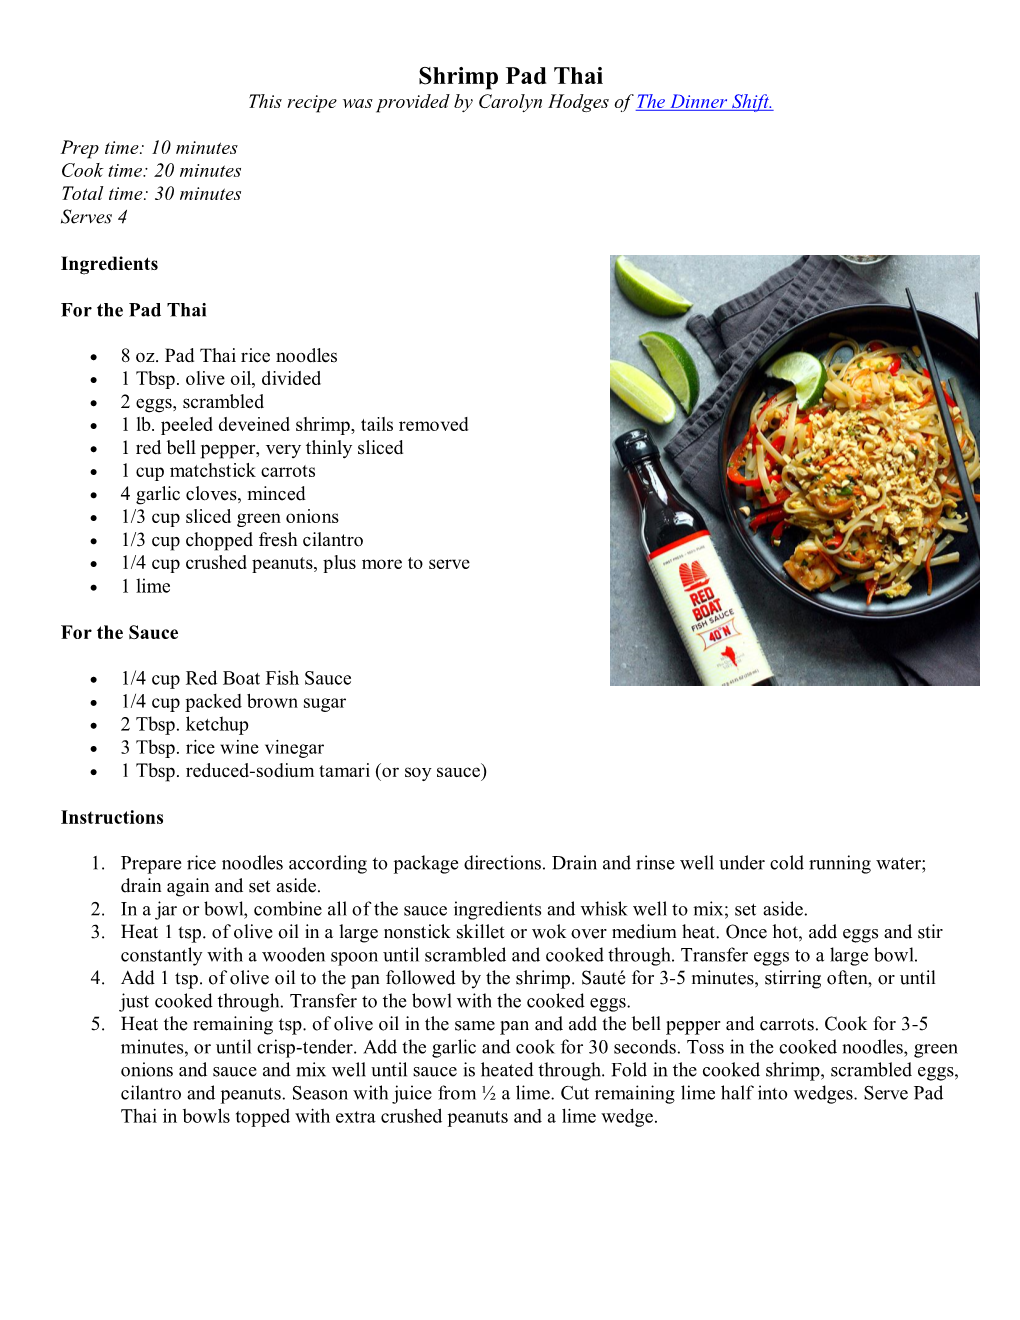 Shrimp Pad Thai This Recipe Was Provided by Carolyn Hodges of the Dinner Shift